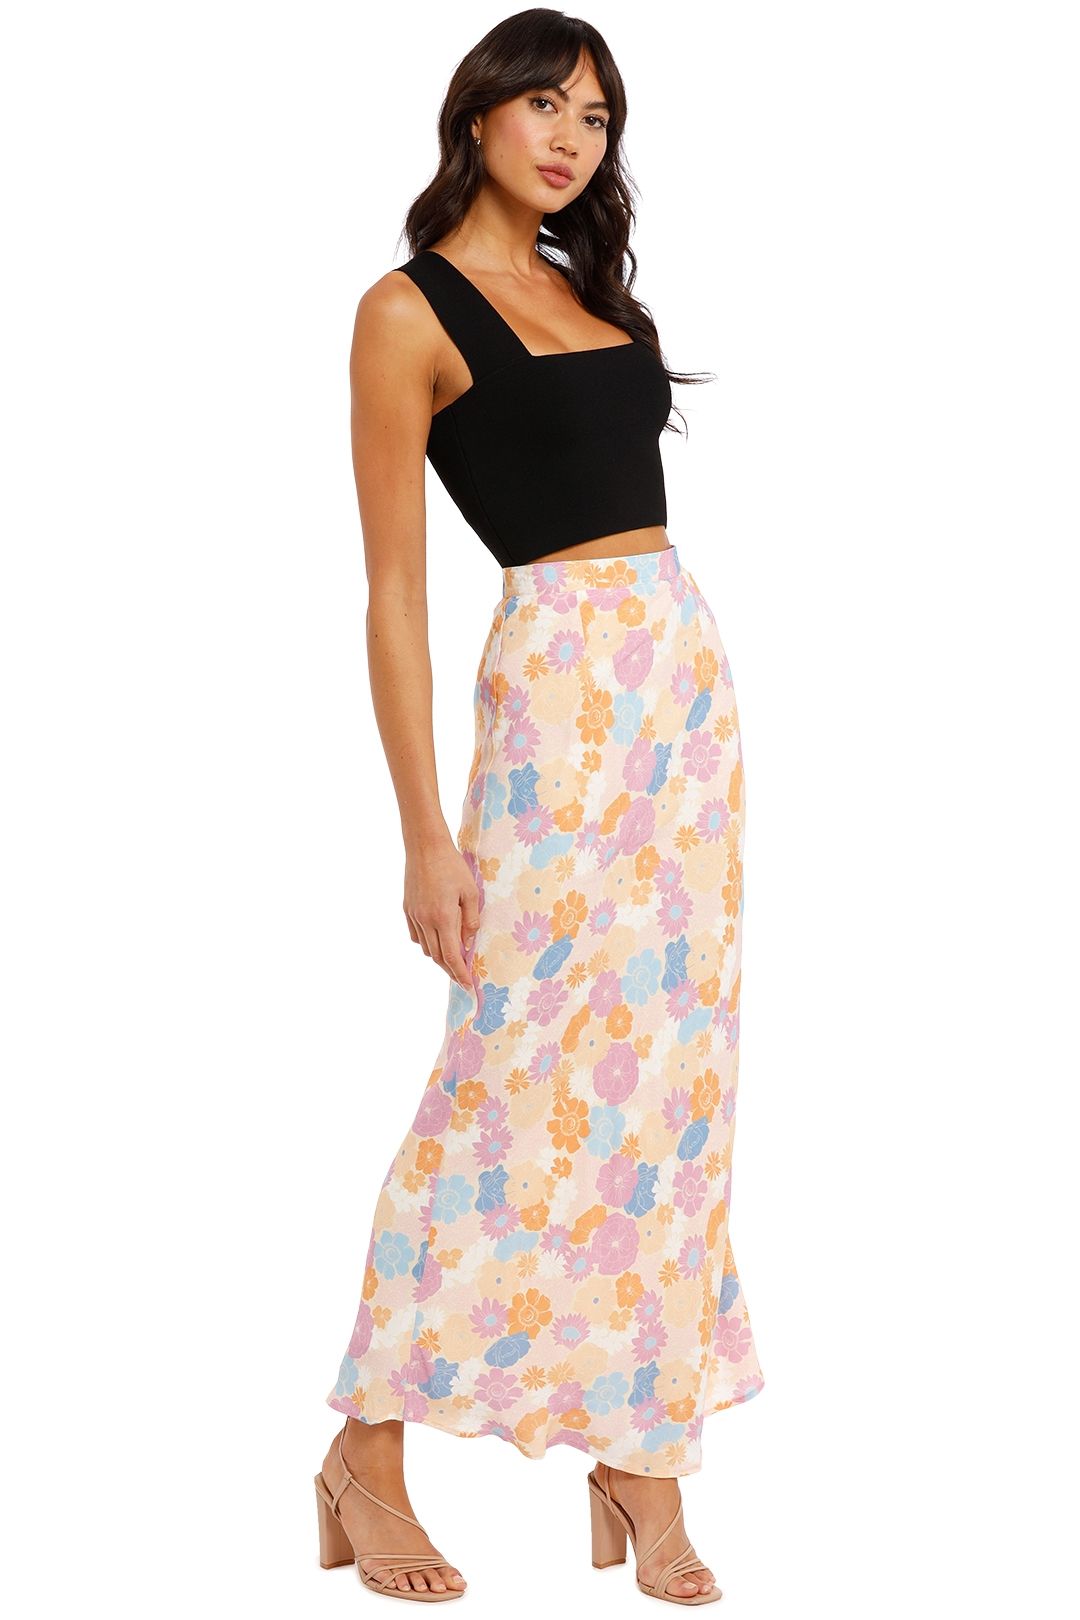 Charlie Holiday Emily Skirt Floral Cove Maxi Length